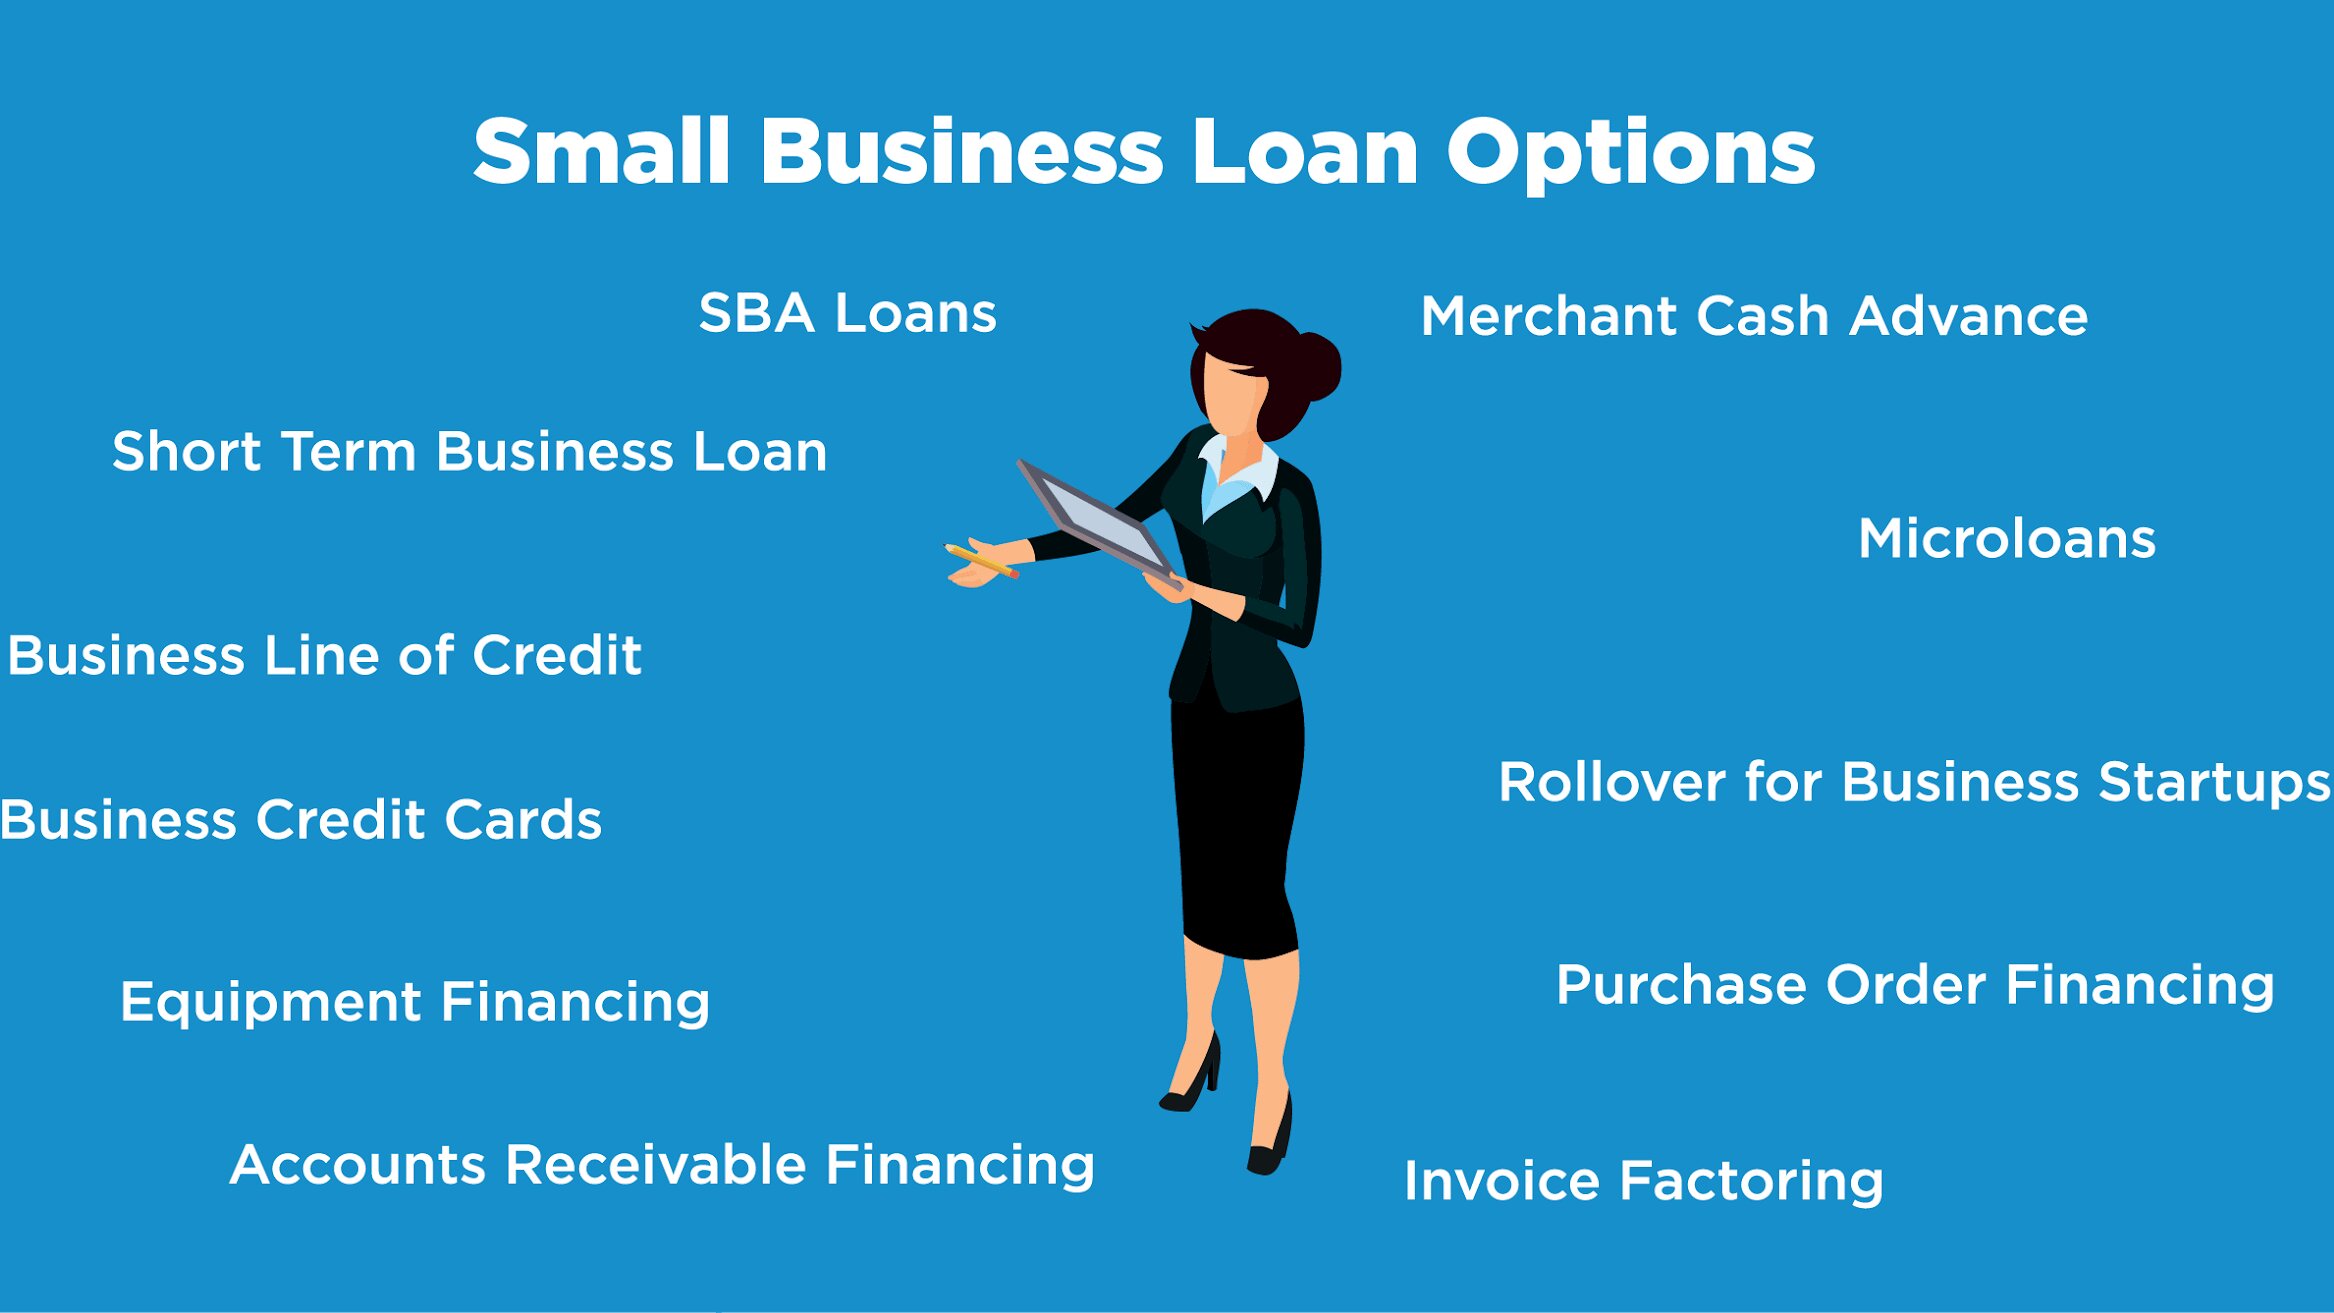 Small Business Loans and Financing Options